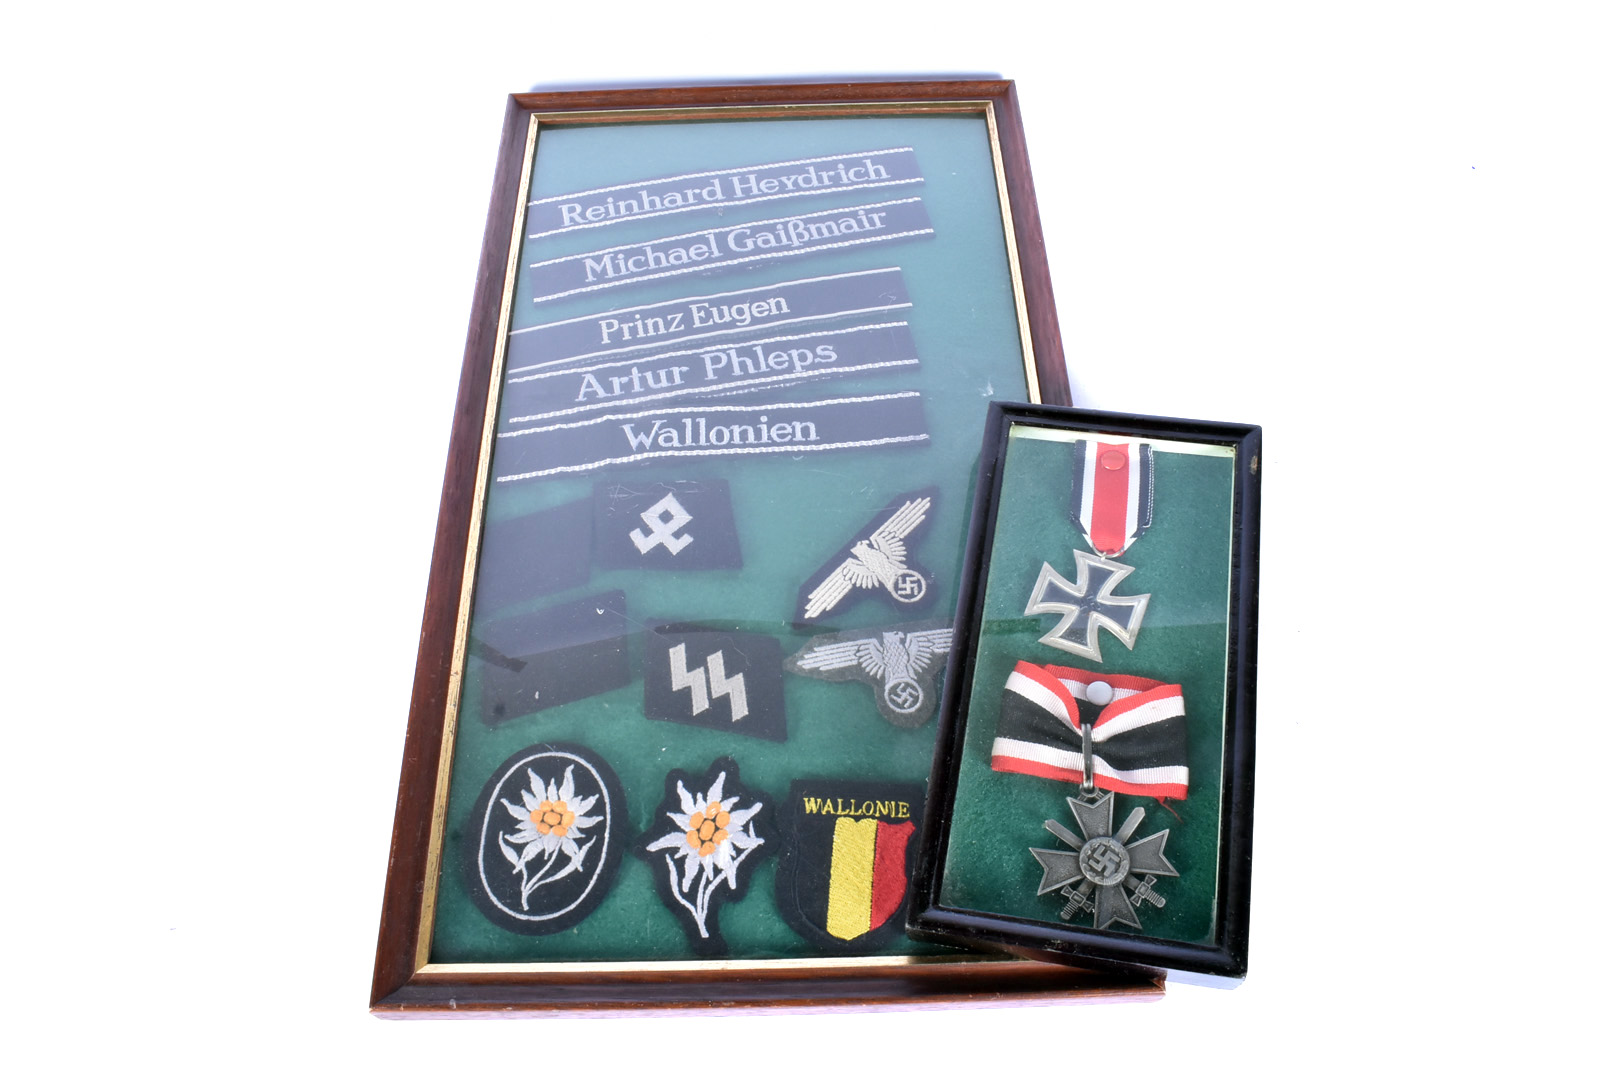 An assortment of German metals and titles, to include Iron Cross, Merit Cross with swords, cloth